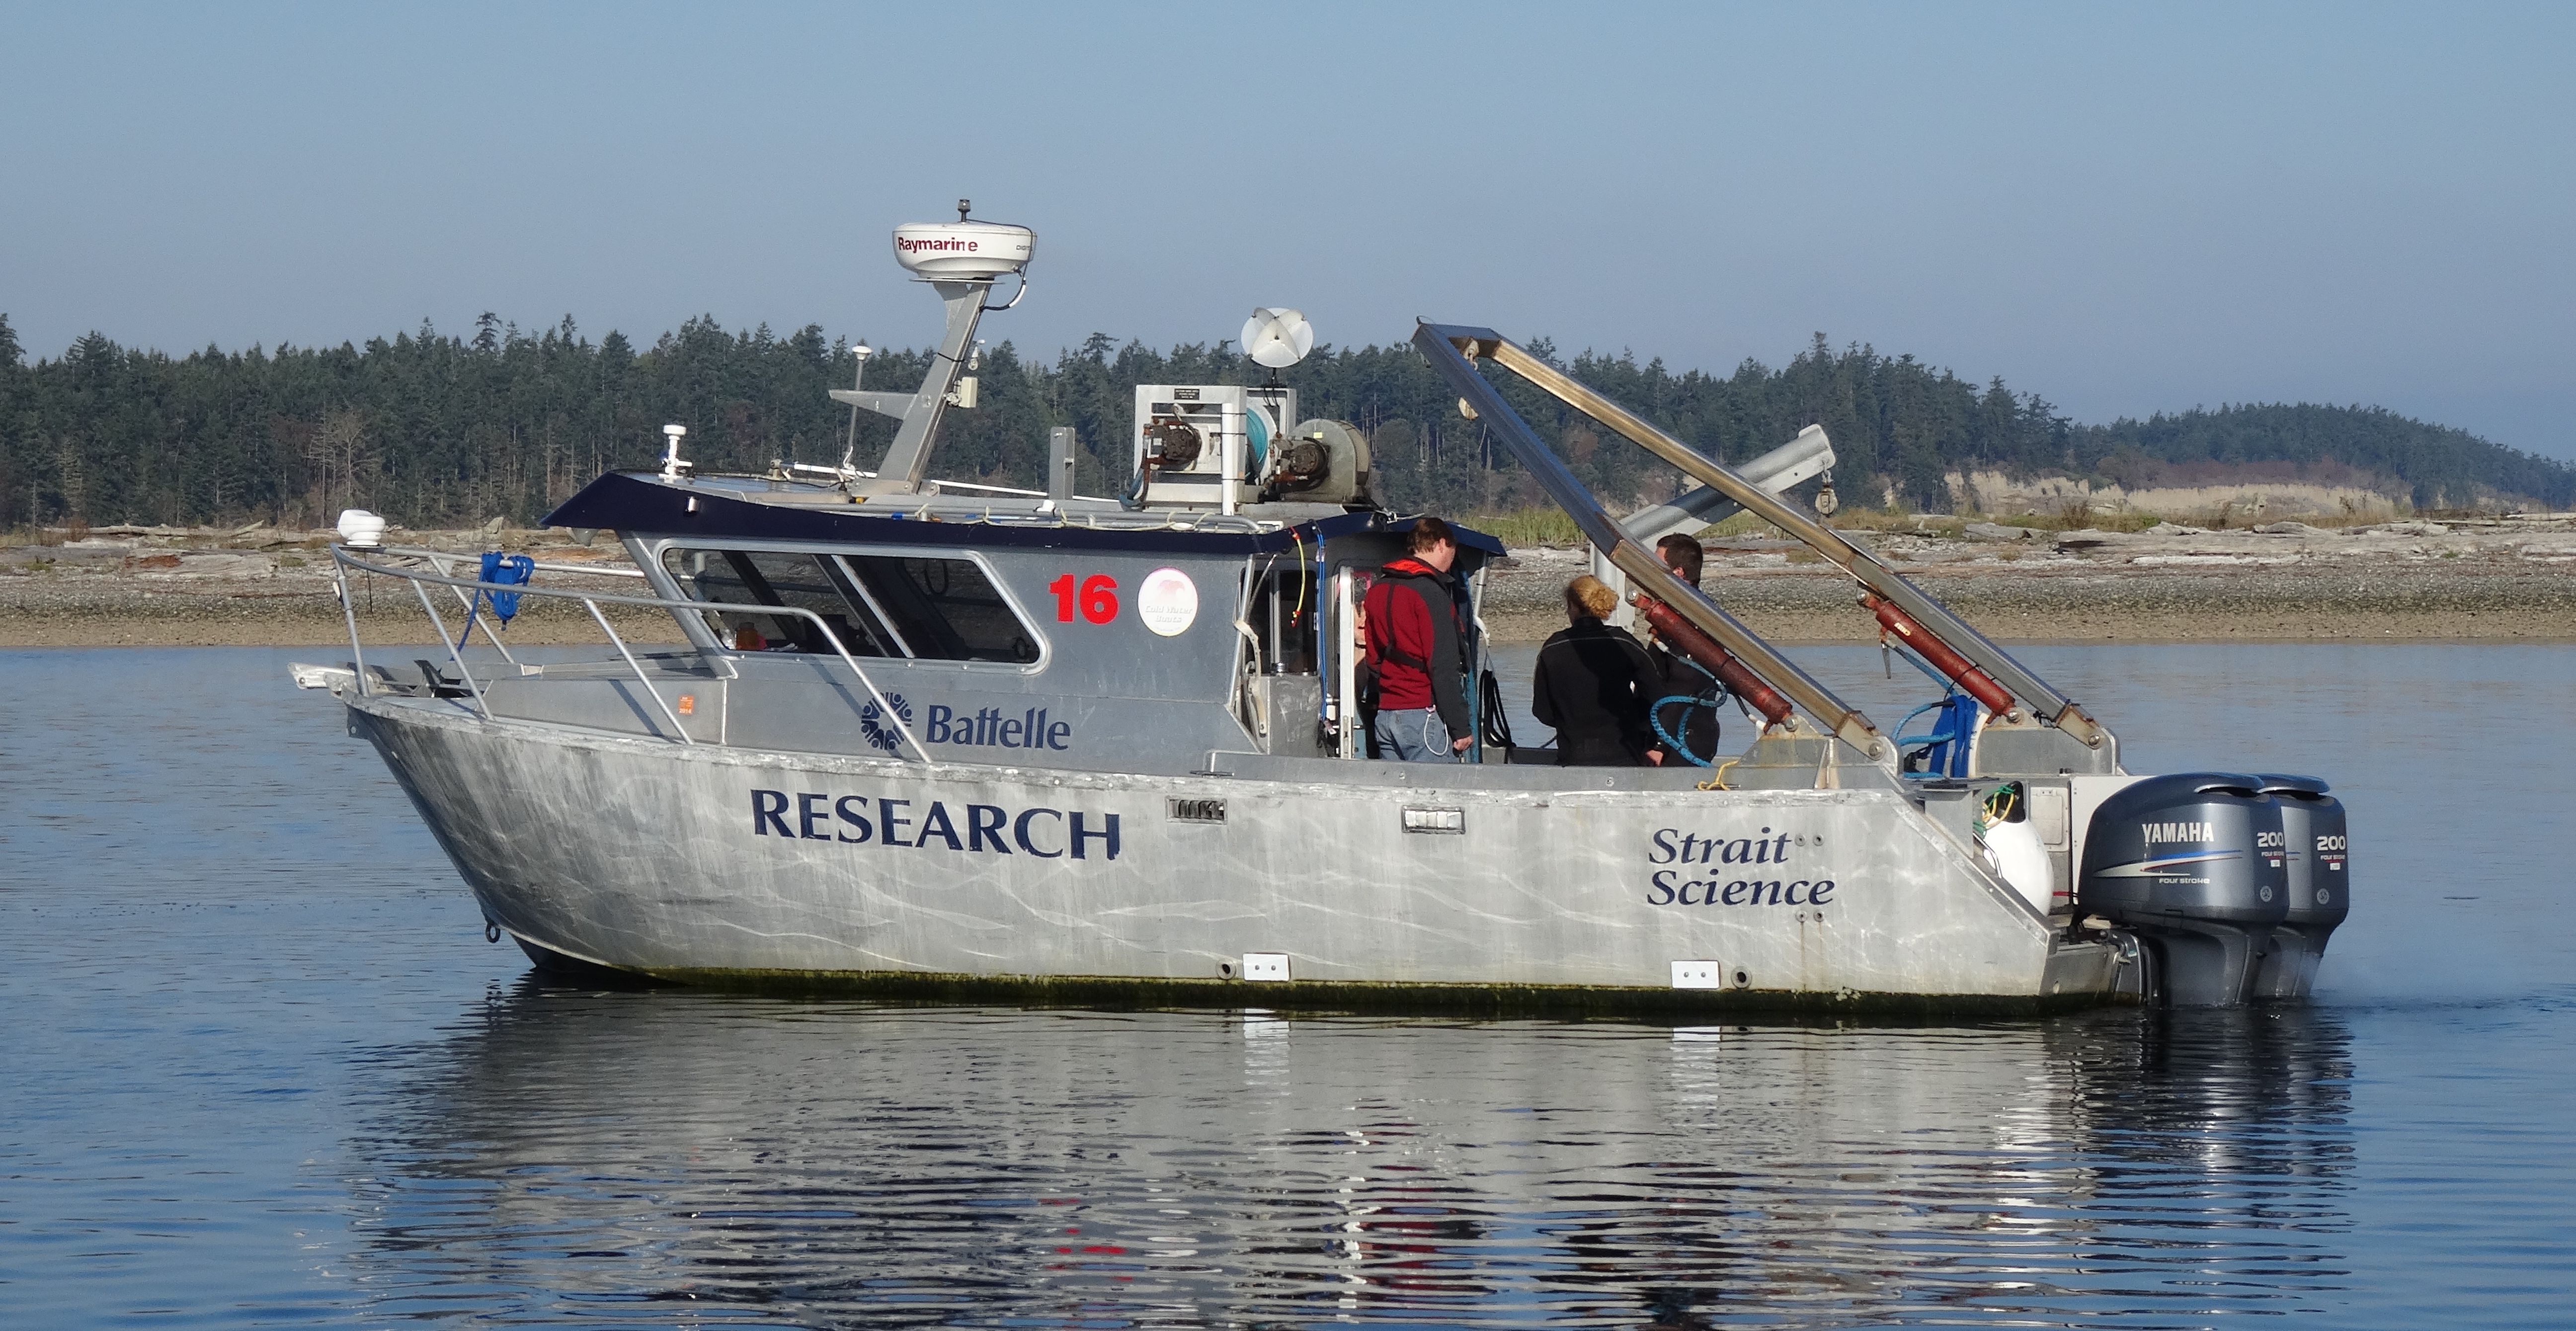 Researchers head out on the RV Strait Science to conduct scientific operations.